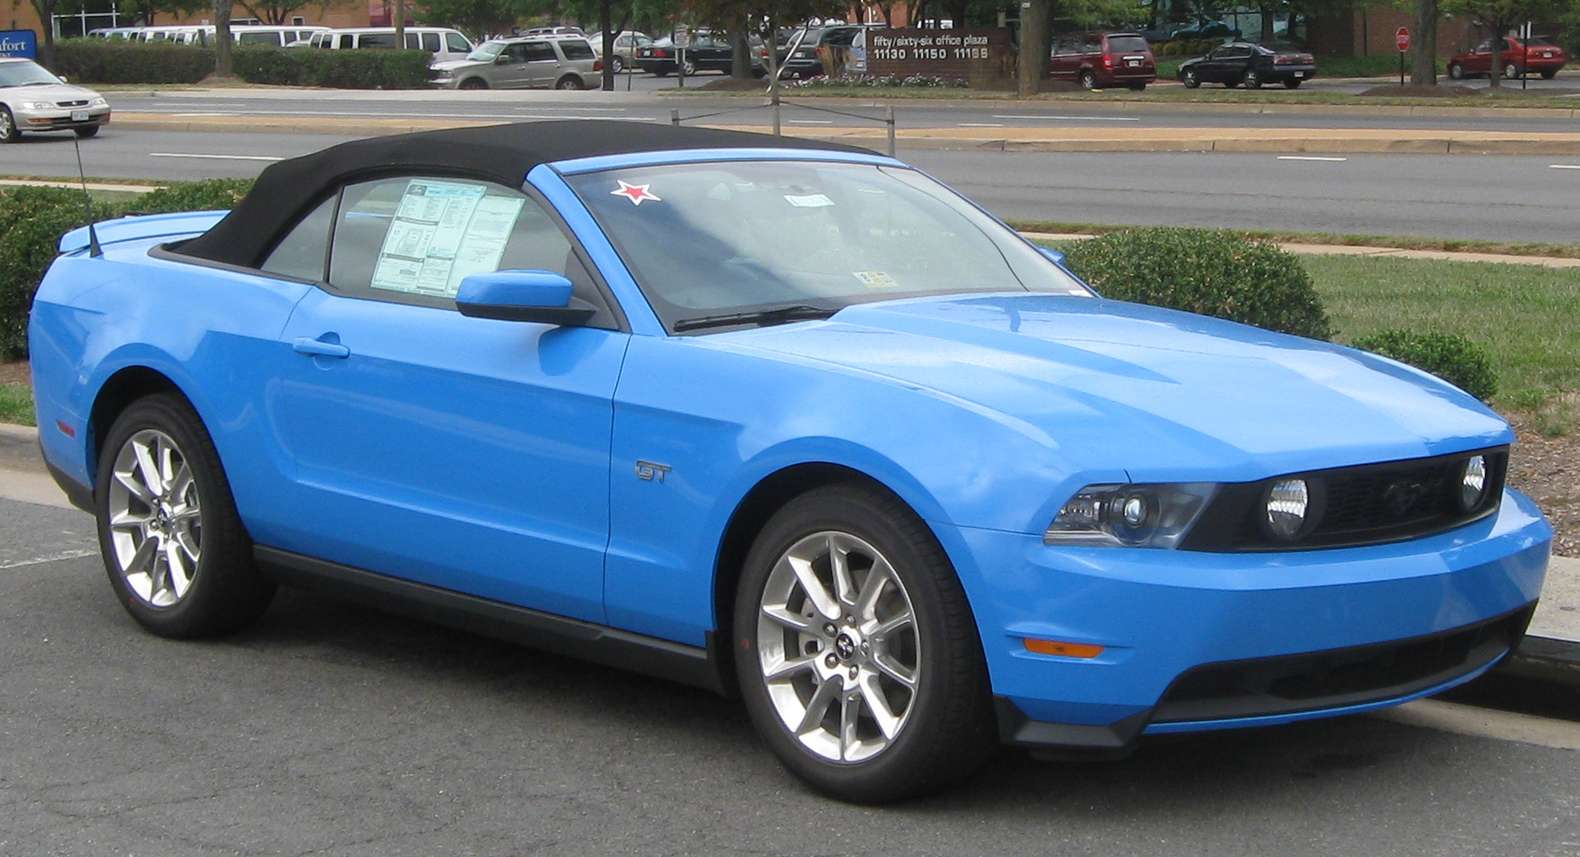 Ford Mustang Convertible #9392615